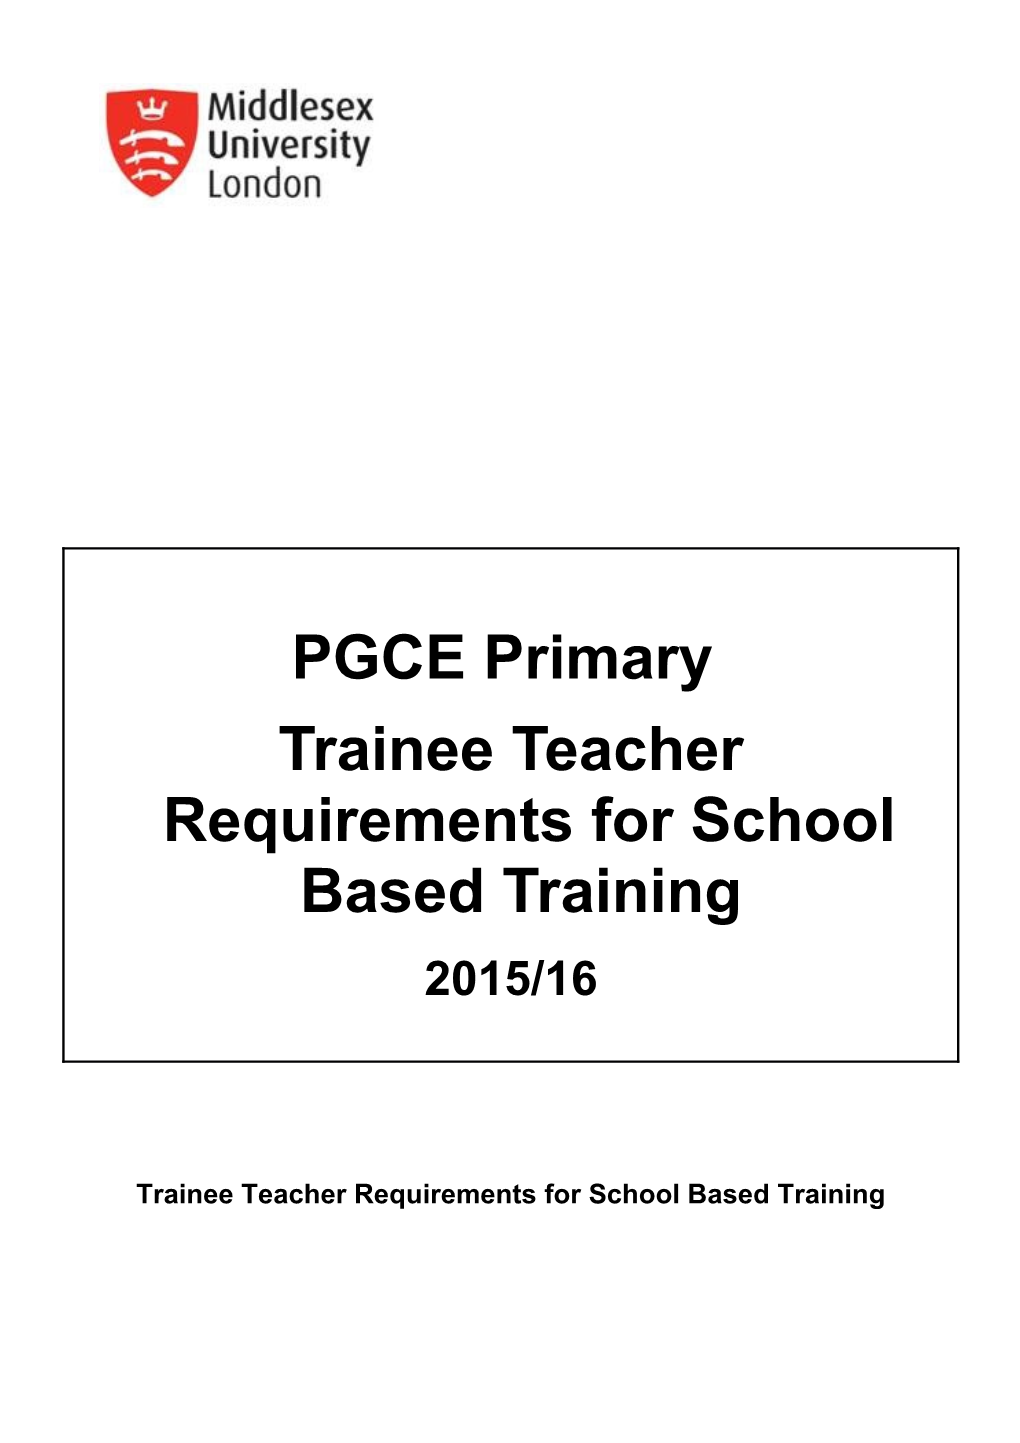 Trainee Teacher Requirements for School Based Training